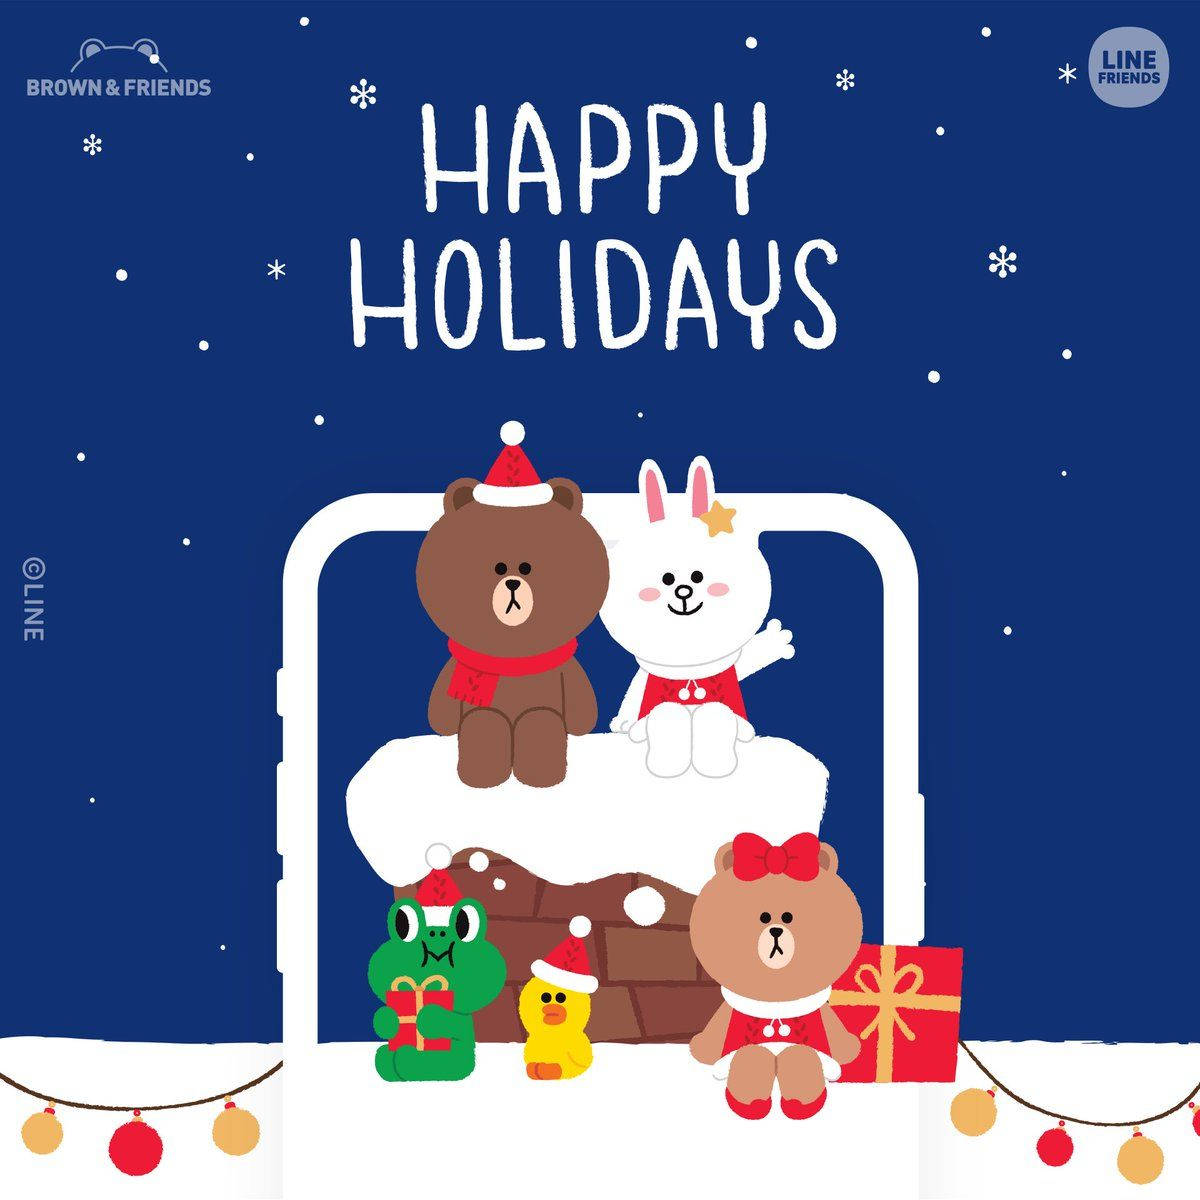 Escape the stress of the season and join the Line Friends for some holiday fun! Wallpaper